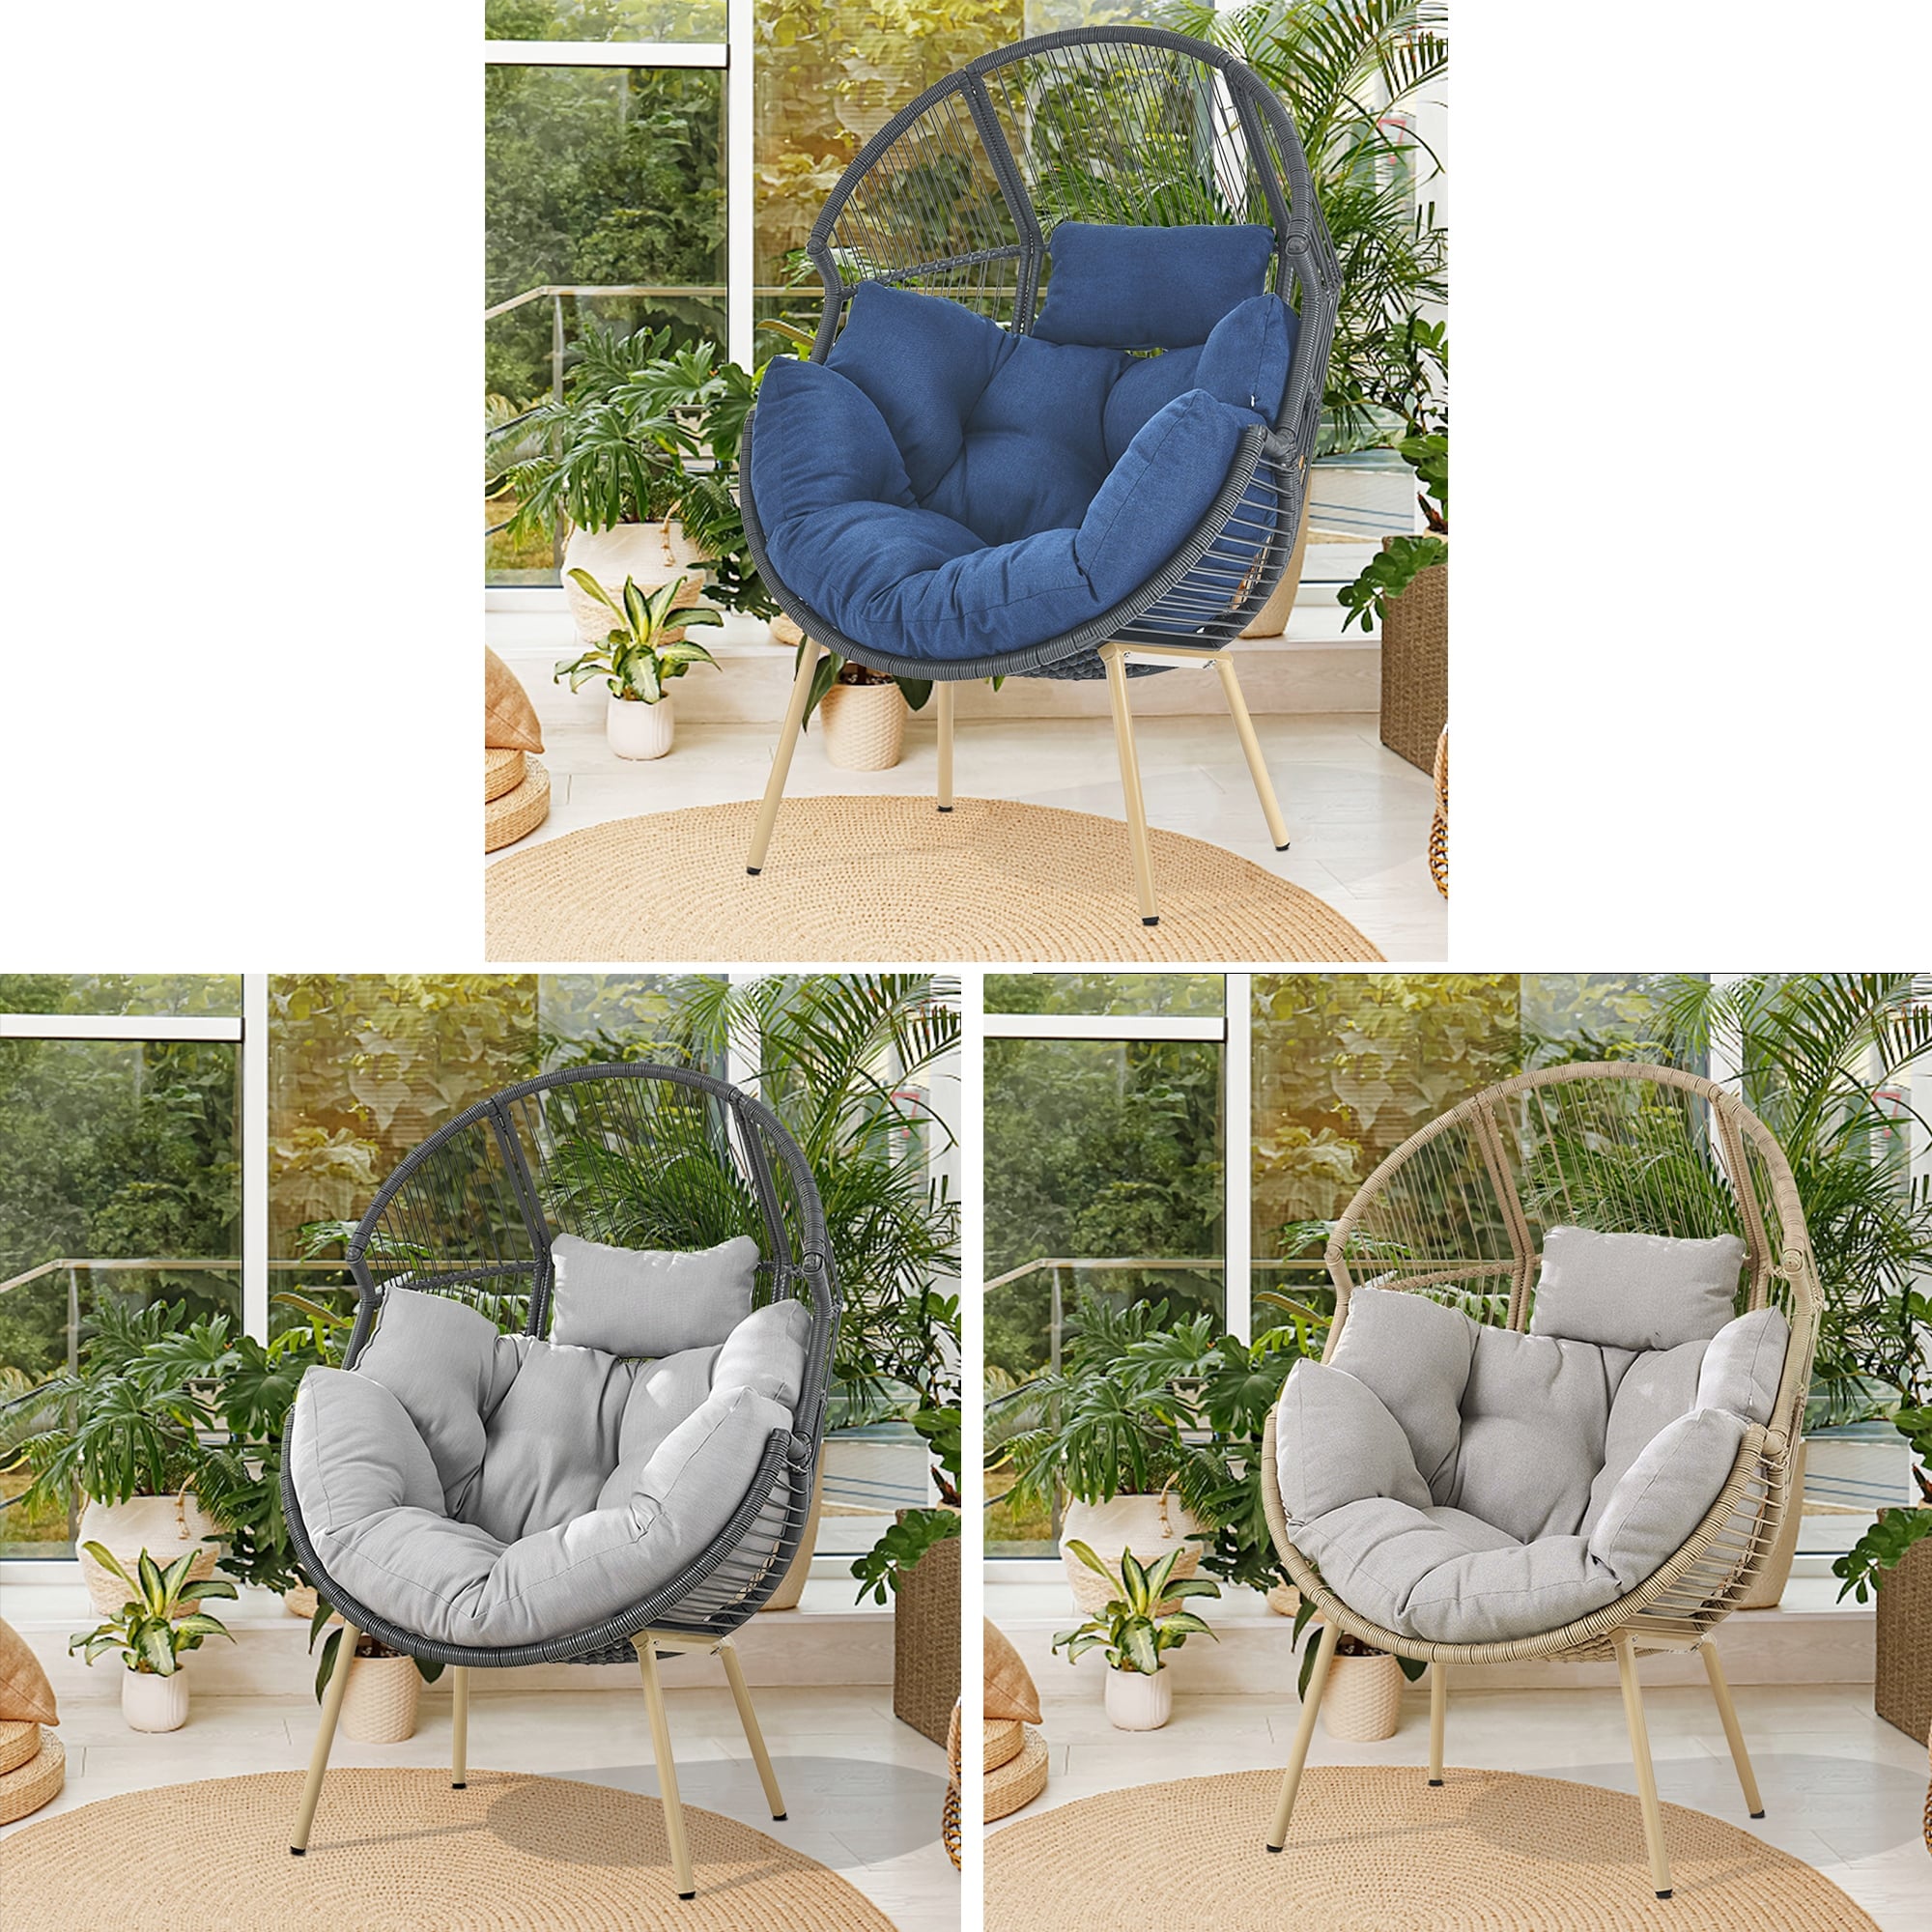 https://ak1.ostkcdn.com/images/products/is/images/direct/c0cba3687356094875f7436425b331e79fb7343a/Outdoor-Egg-Chair-with-Cushion-Oversized-Egg-Chair.jpg